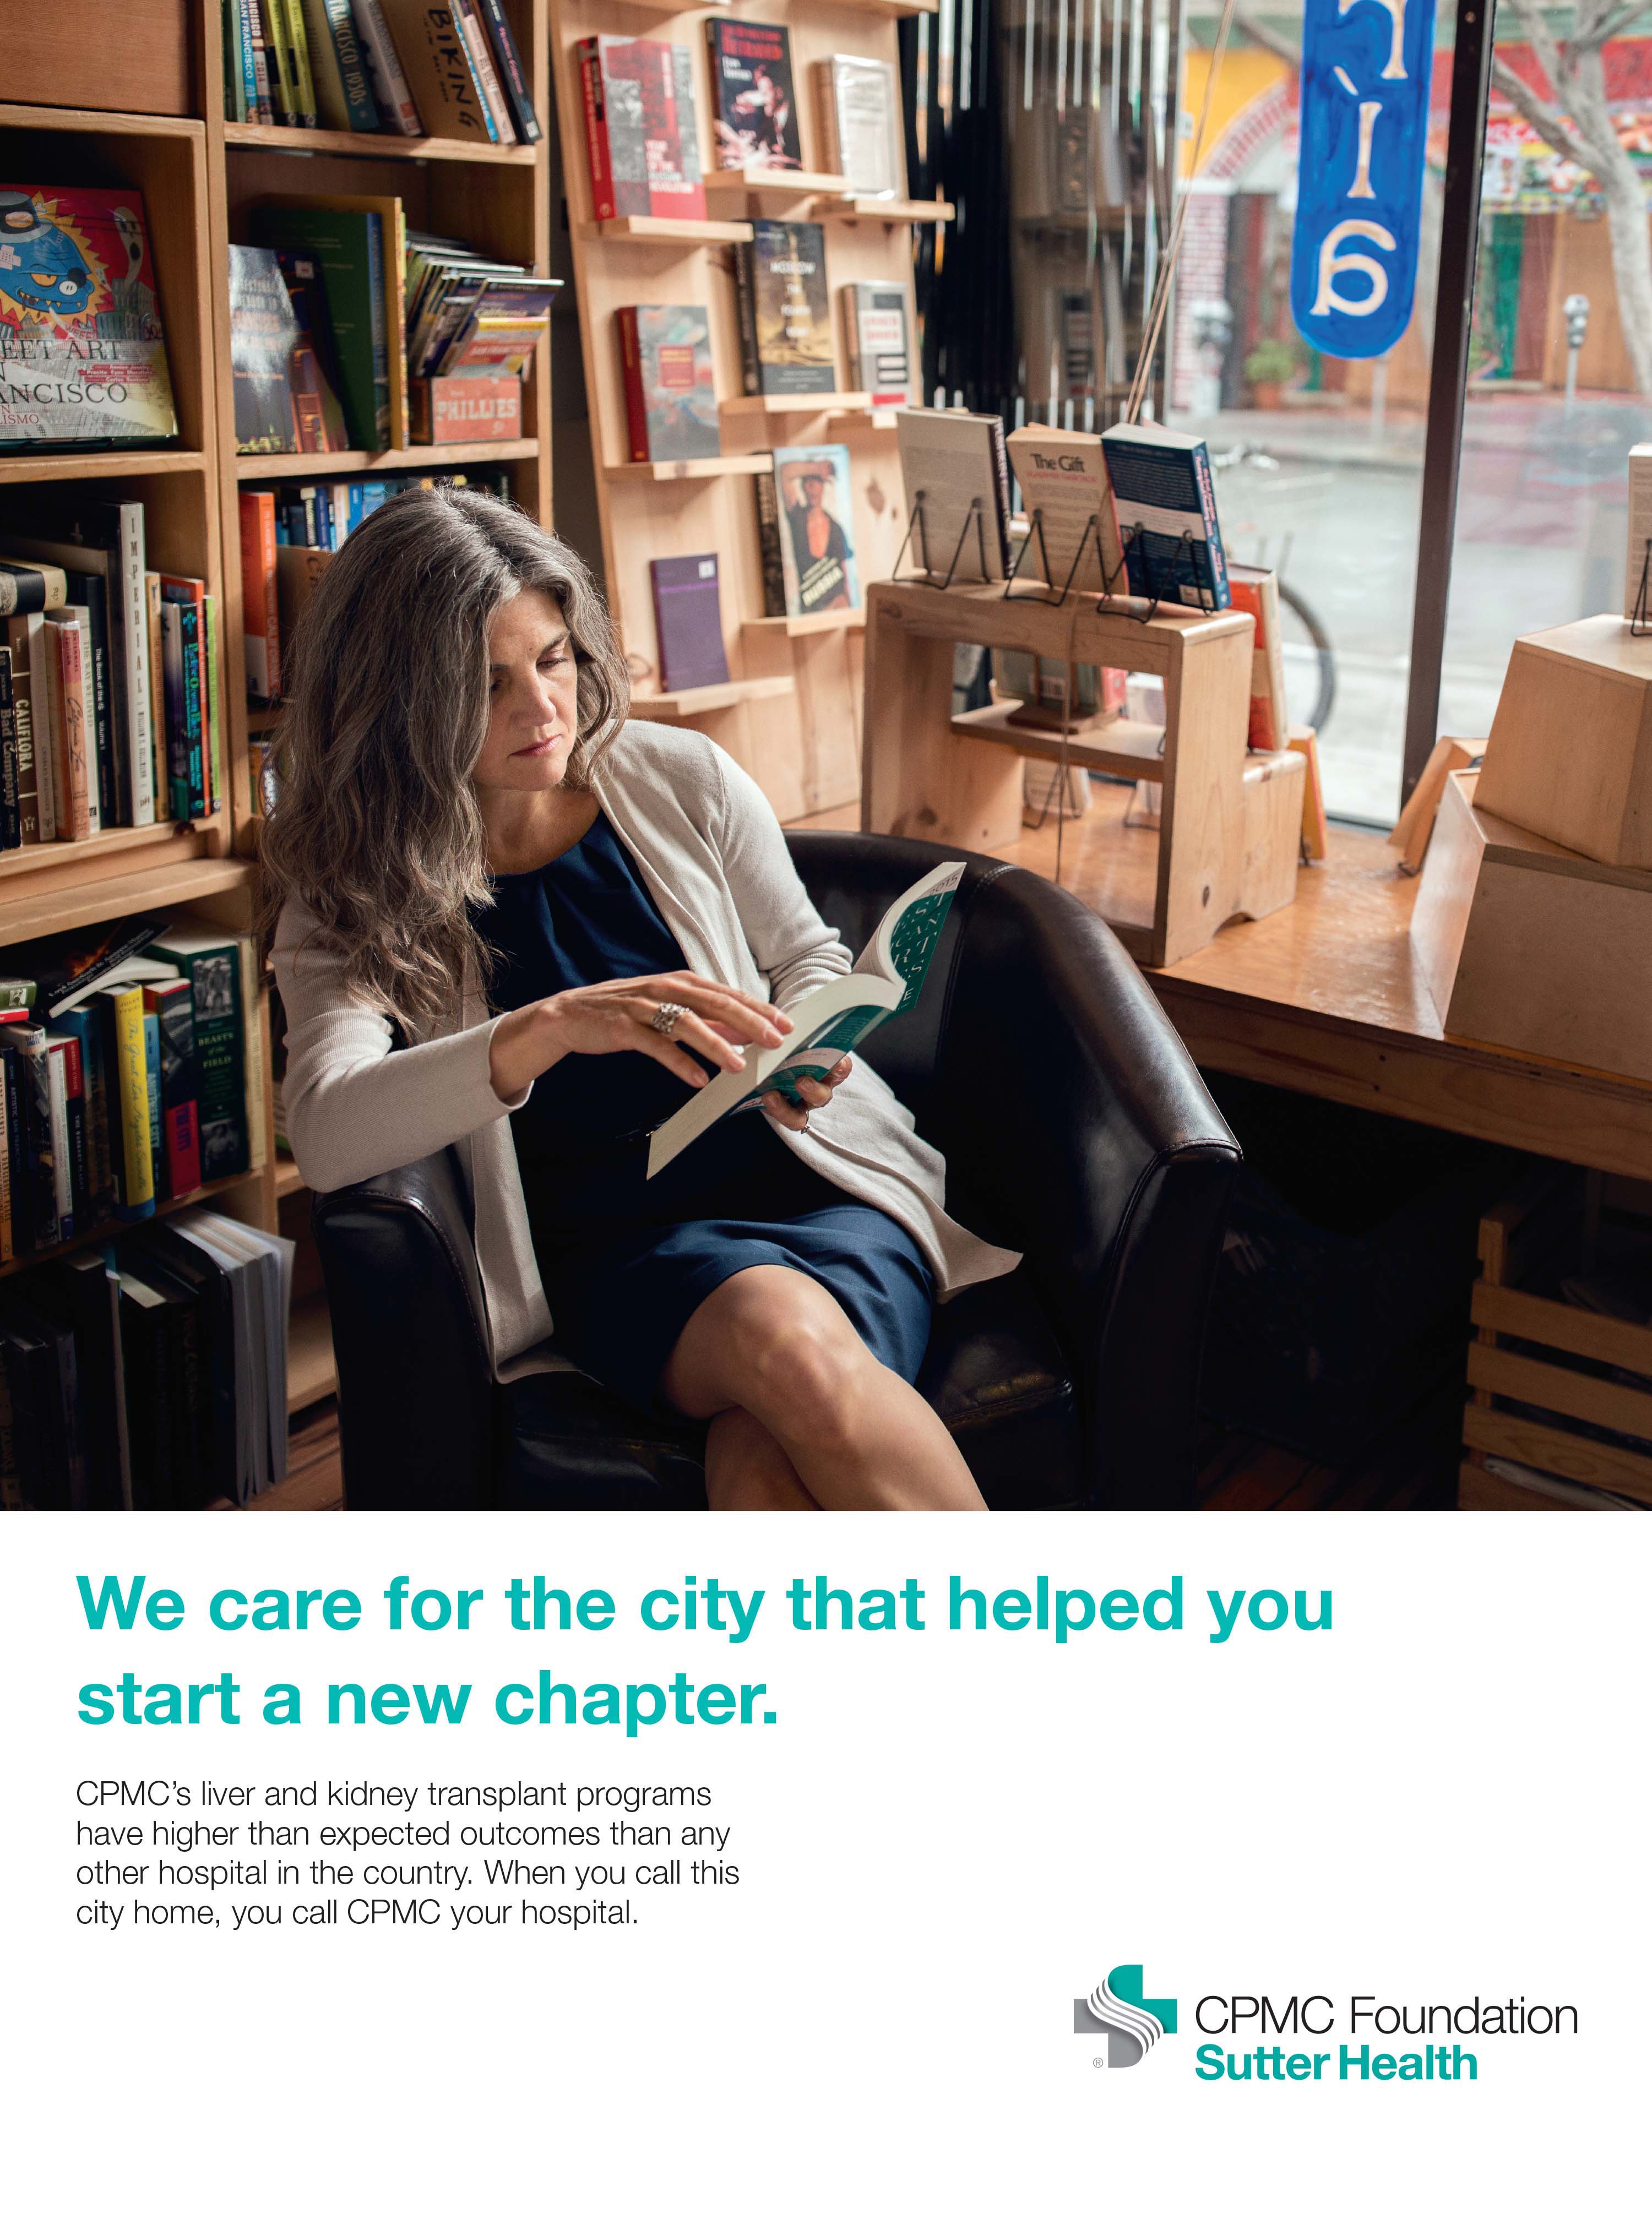 A woman sits in a chair reading in a bookstore in a Healthcare Ad Campaign photographed by Lifestyle Photographer Diana Mulvihill